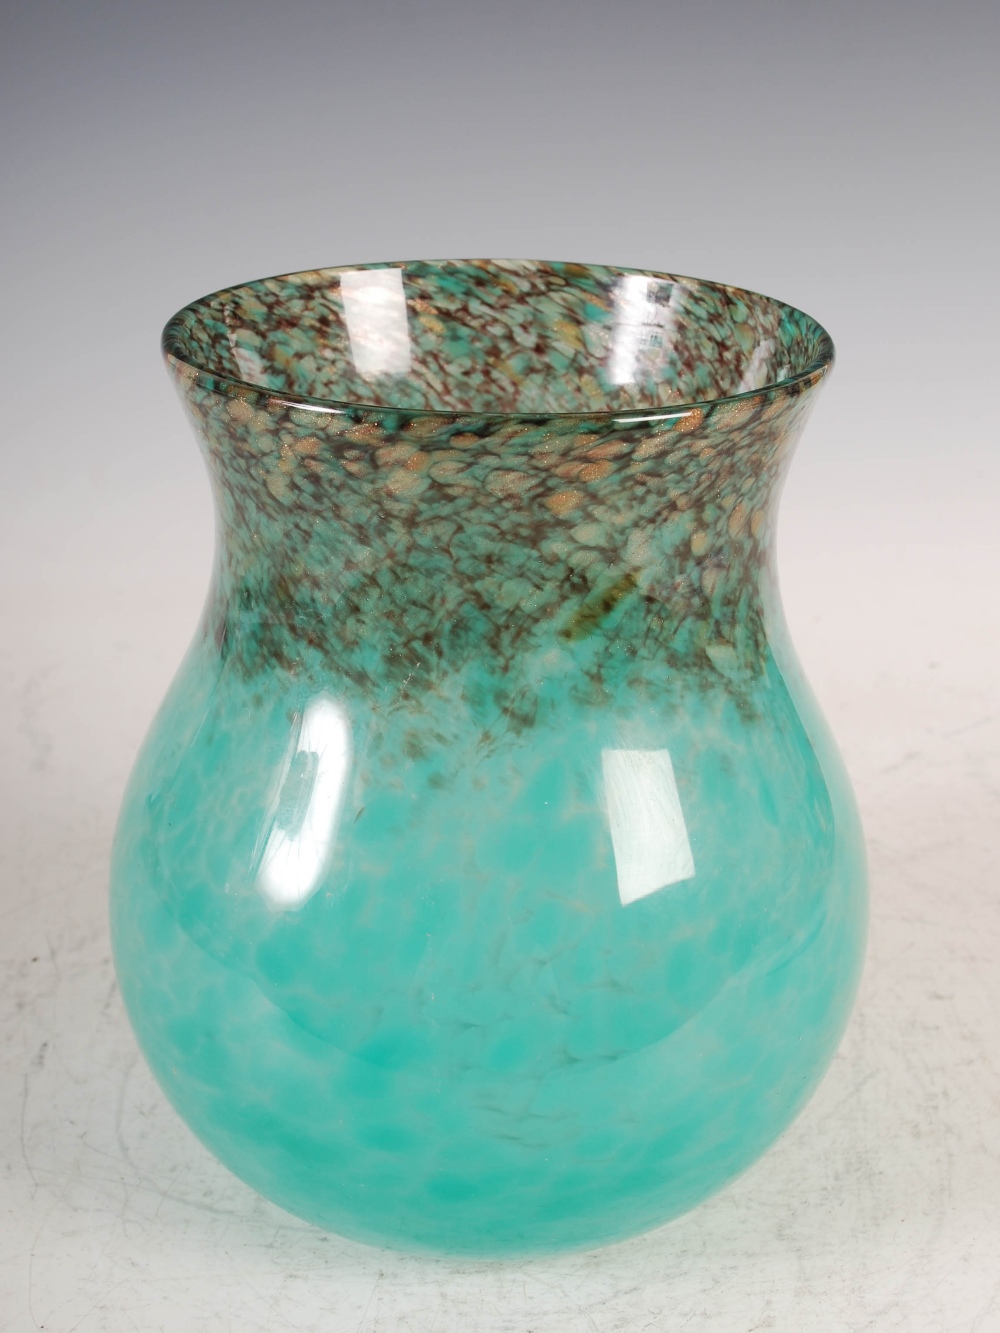 A Monart vase, shape SA, mottled black and green glass with gold coloured inclusions, 22cm high.